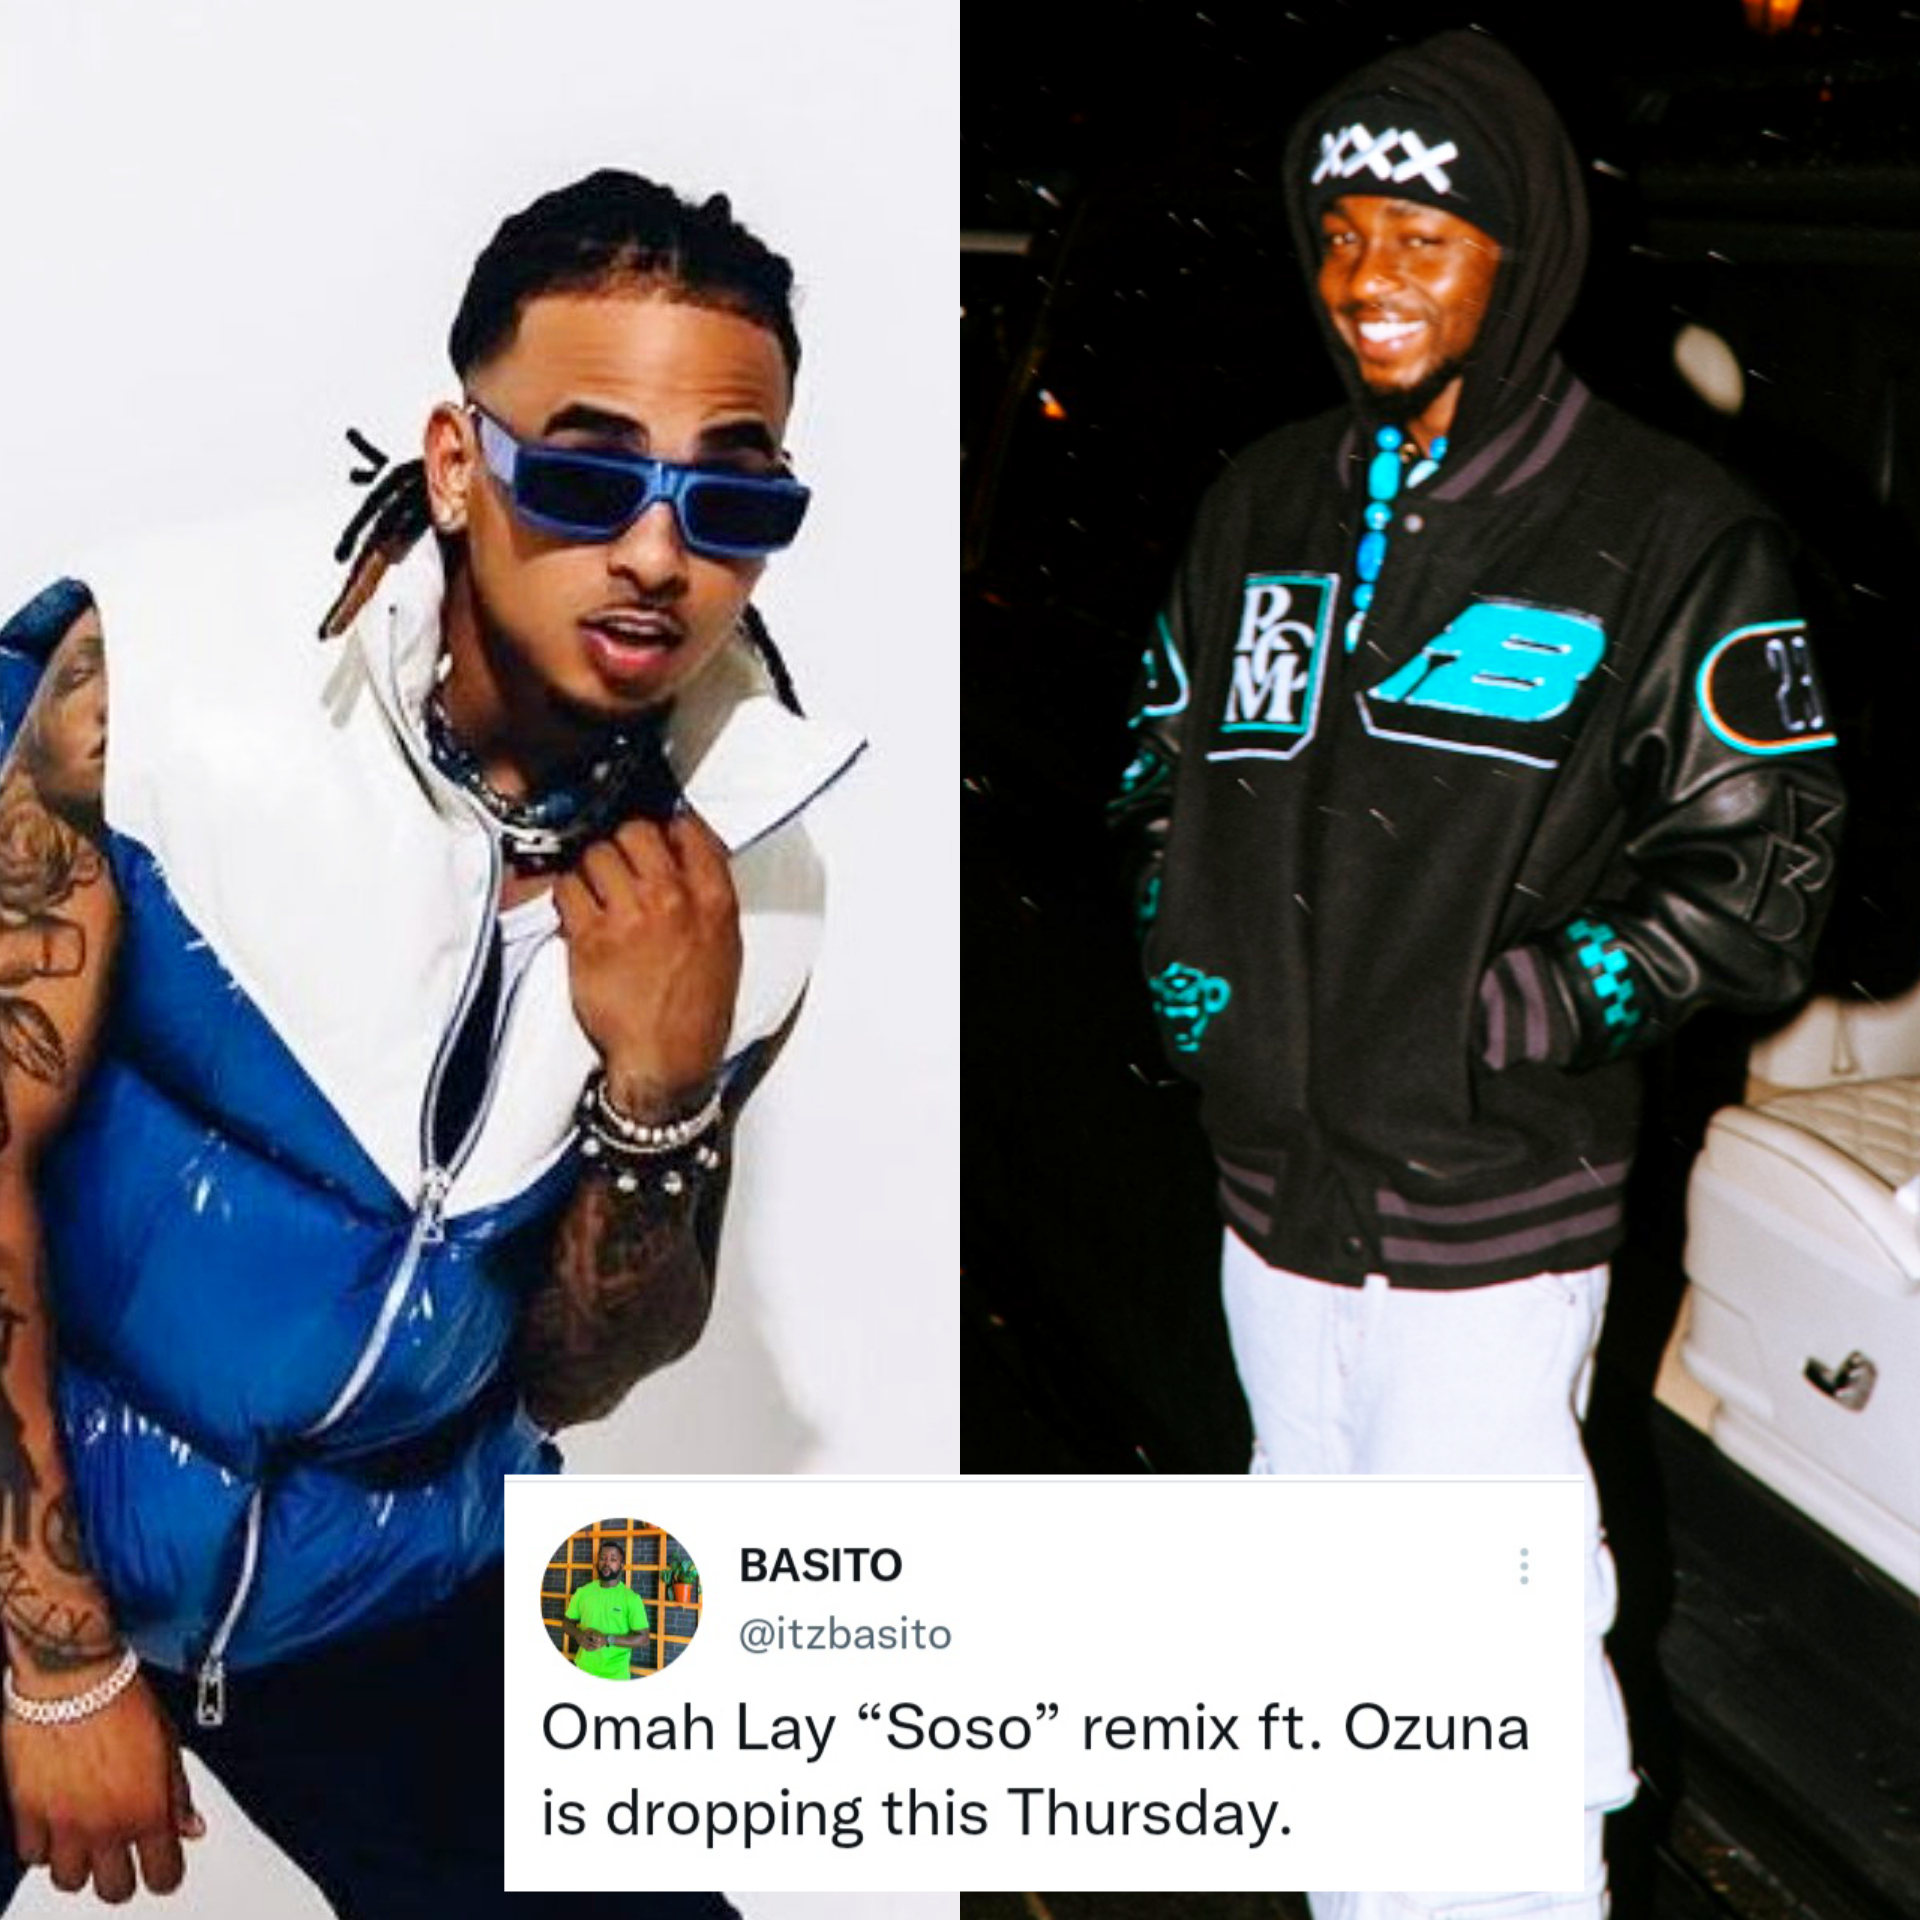 Fans react to Omah Lay Soso remix